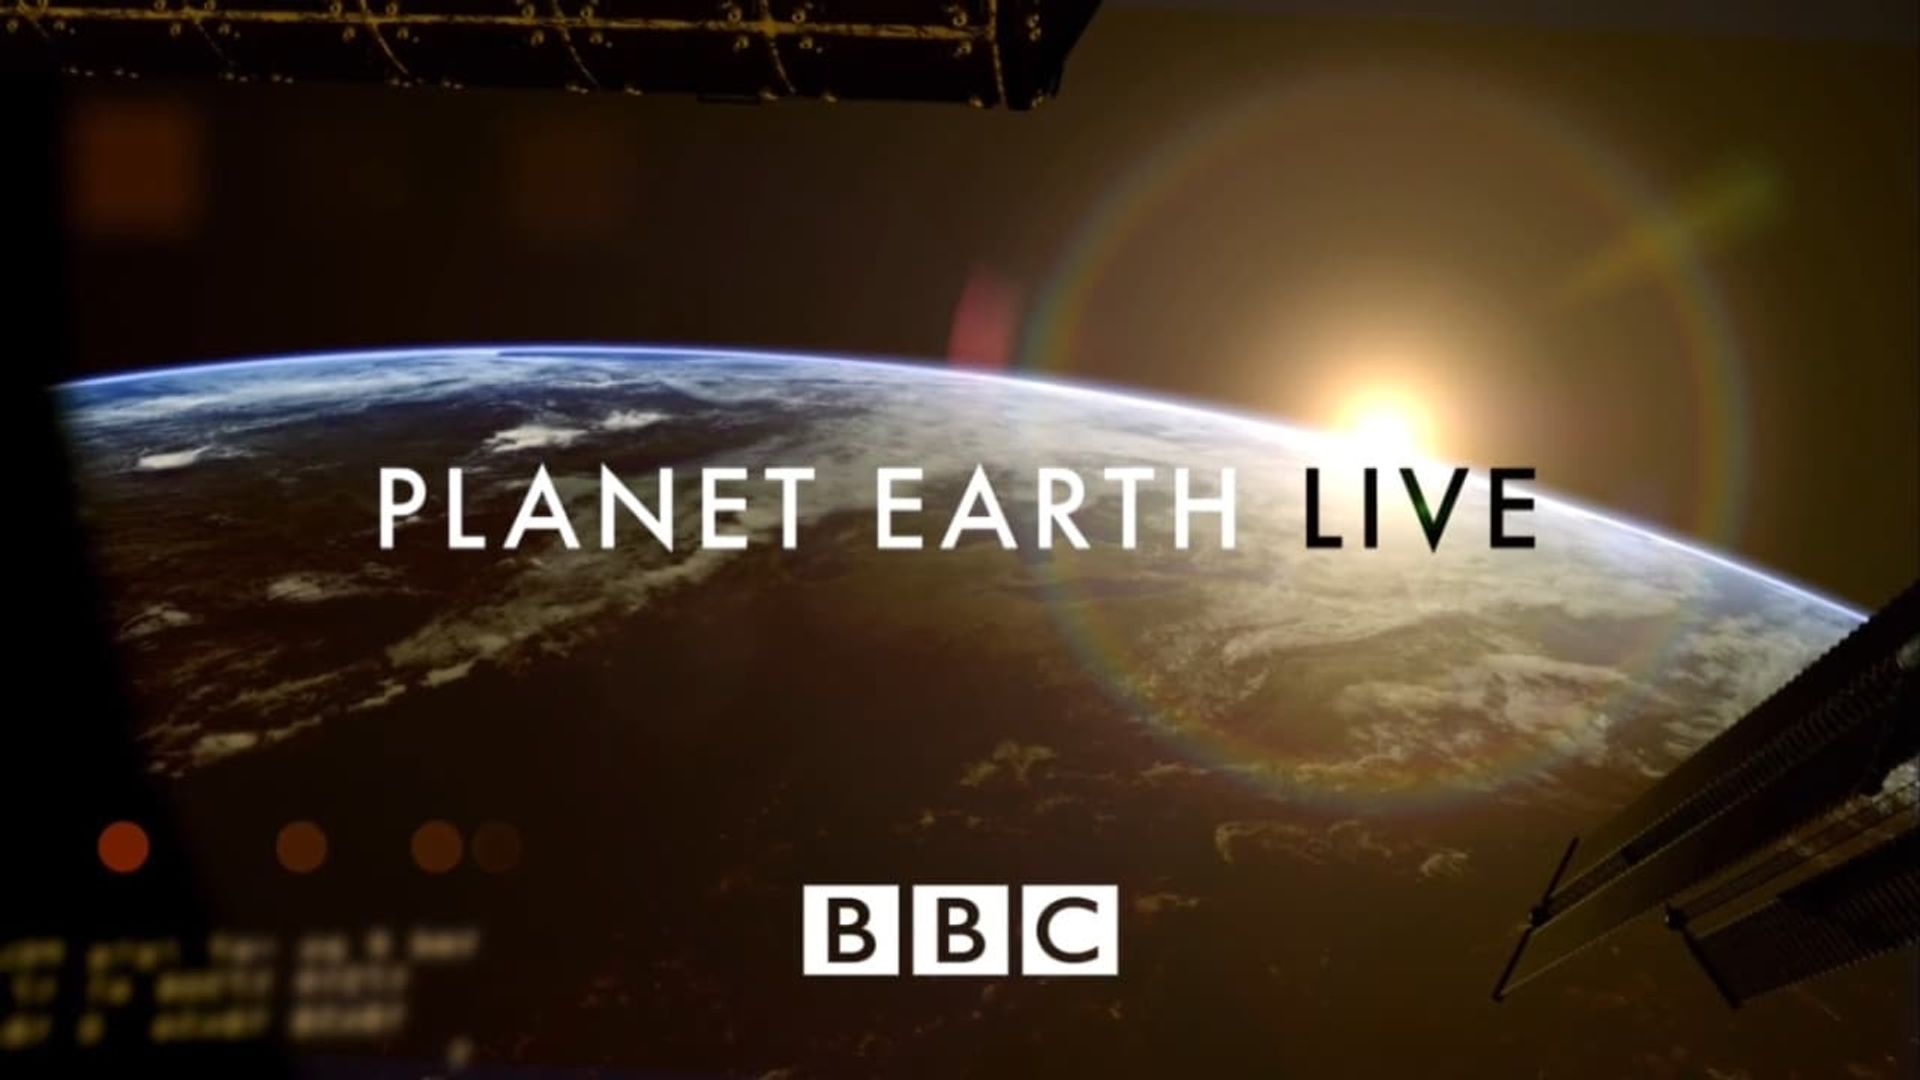 Planet Earth Live background